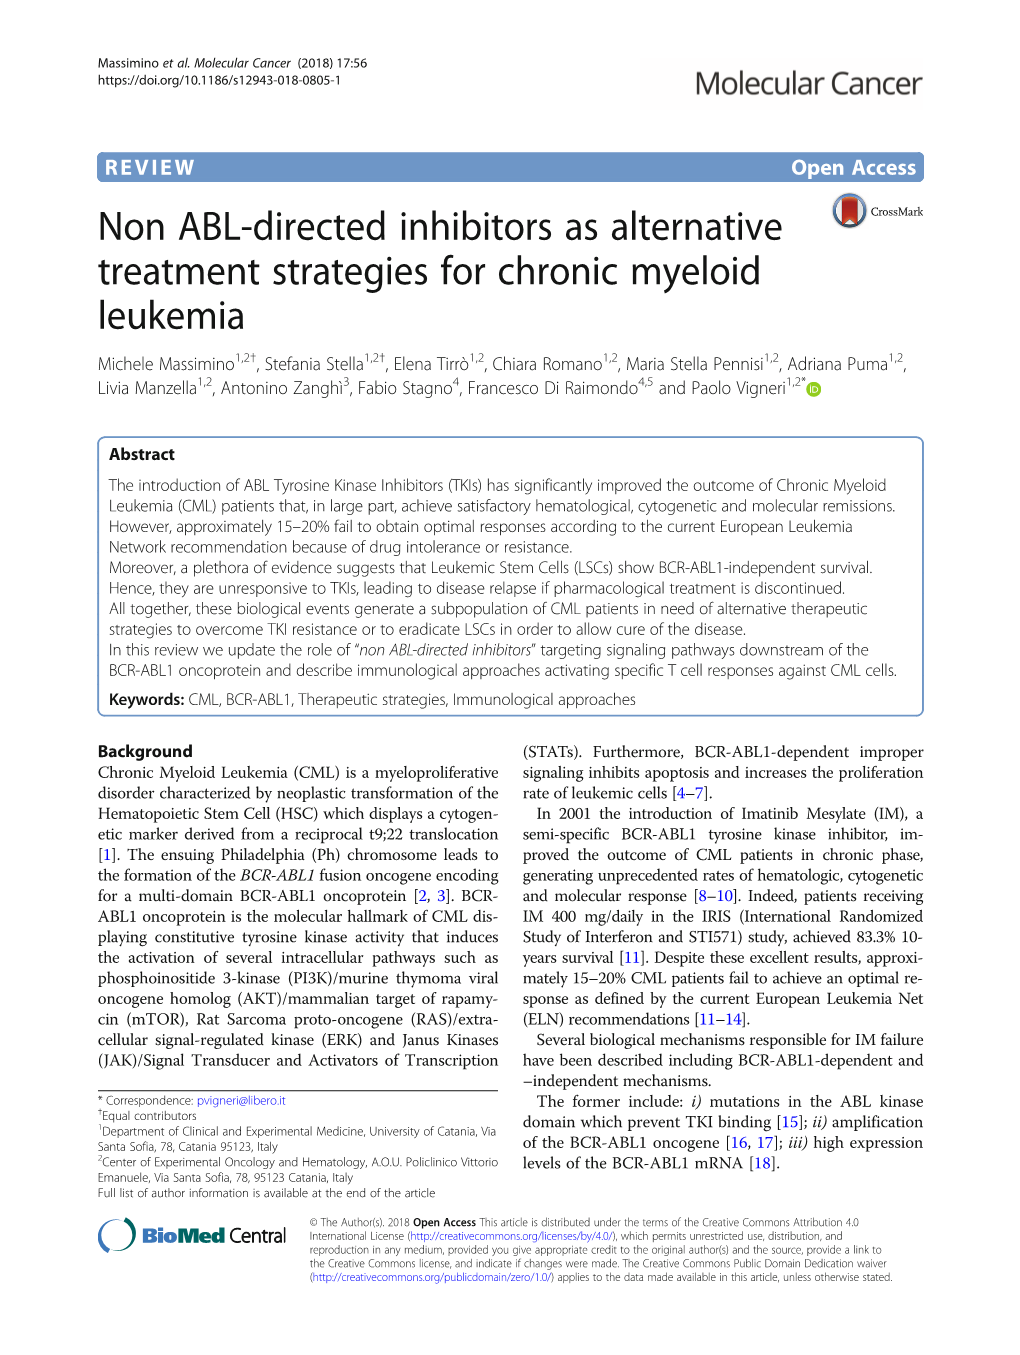 Non ABL-Directed Inhibitors As Alternative Treatment Strategies For